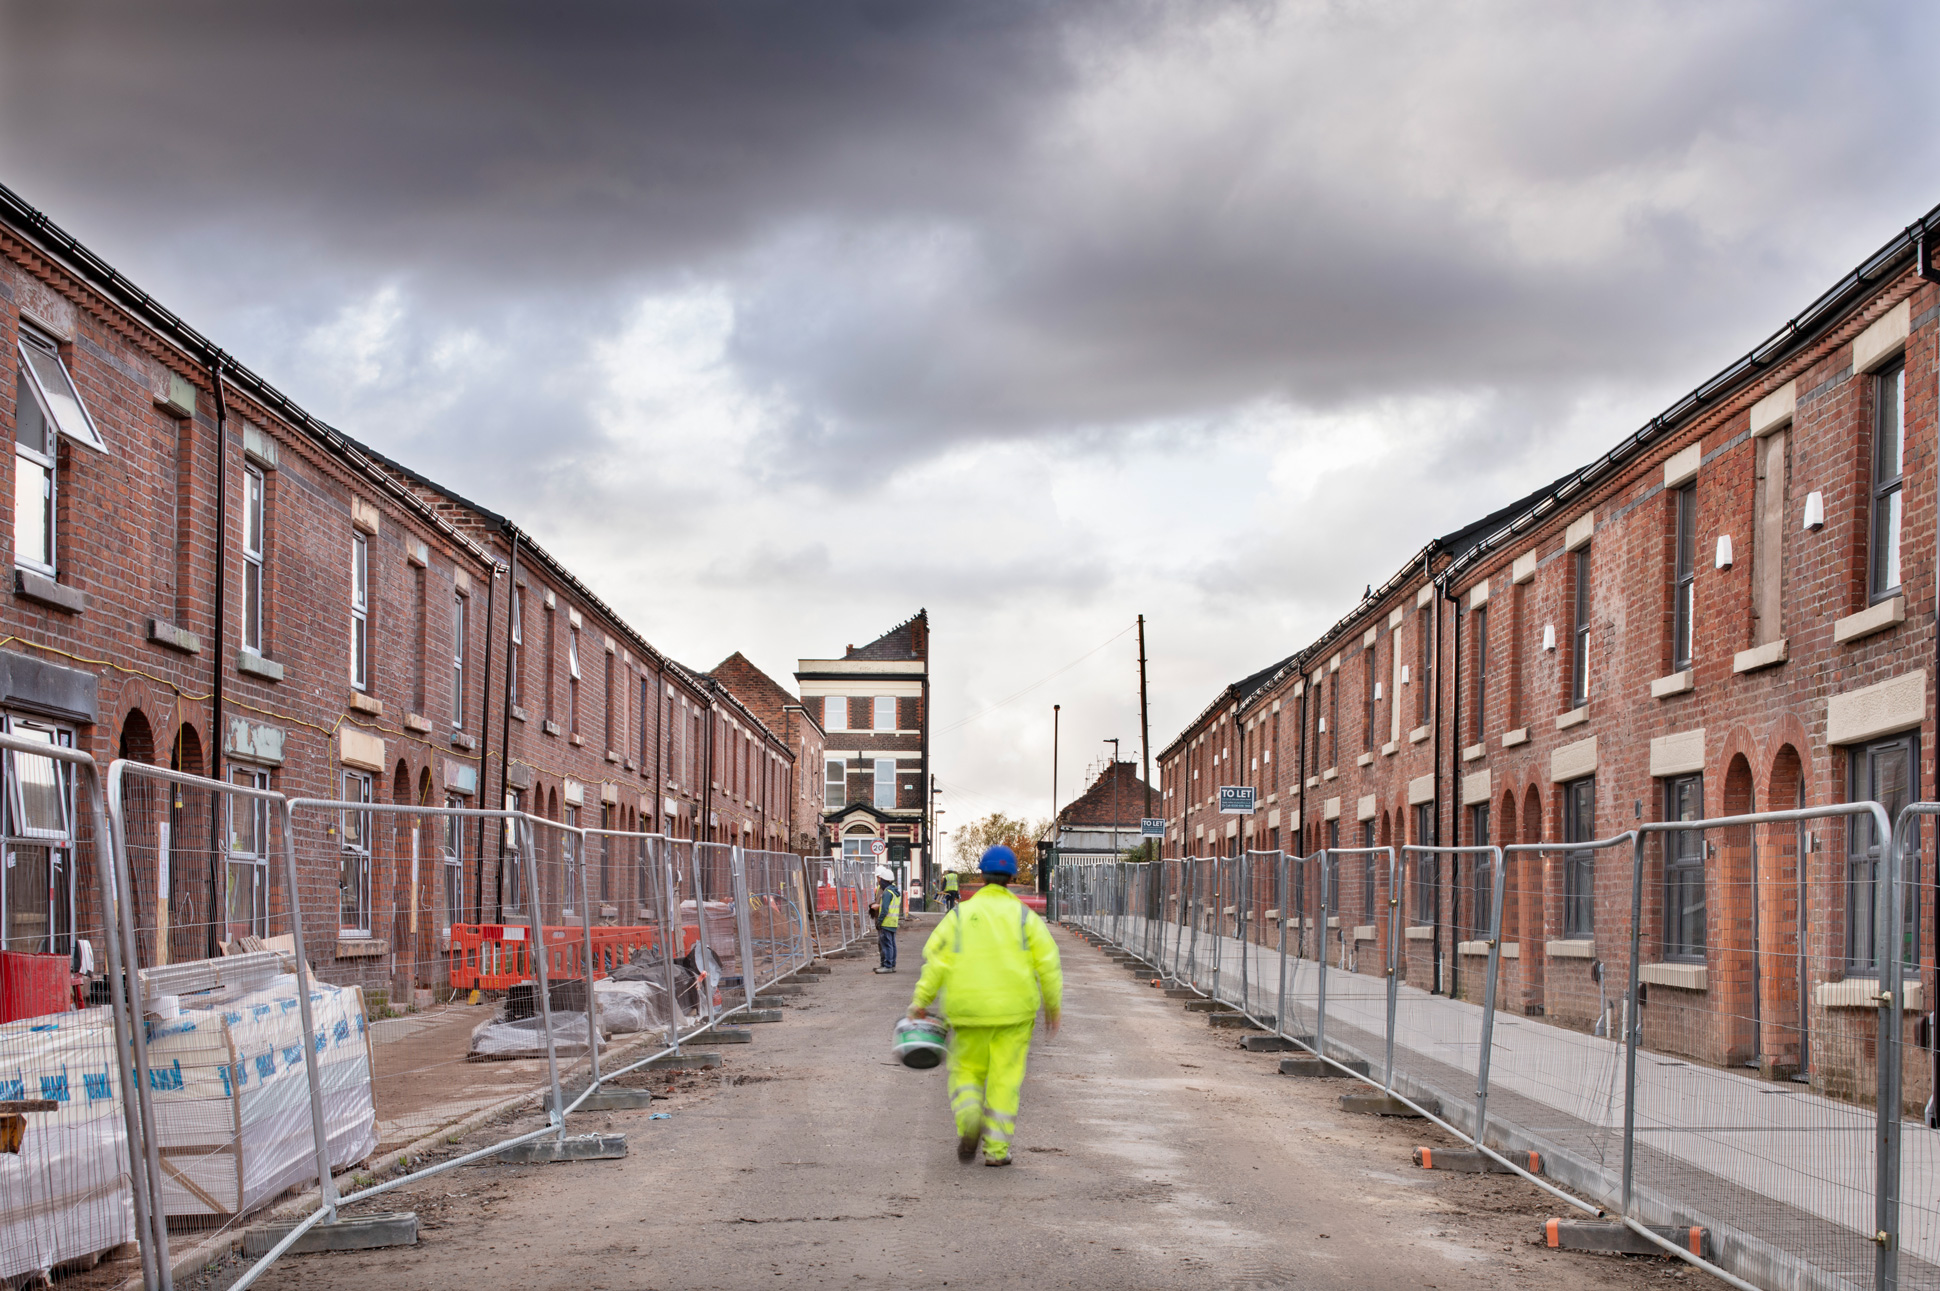 Street of terraced housing under building works with builders on site.